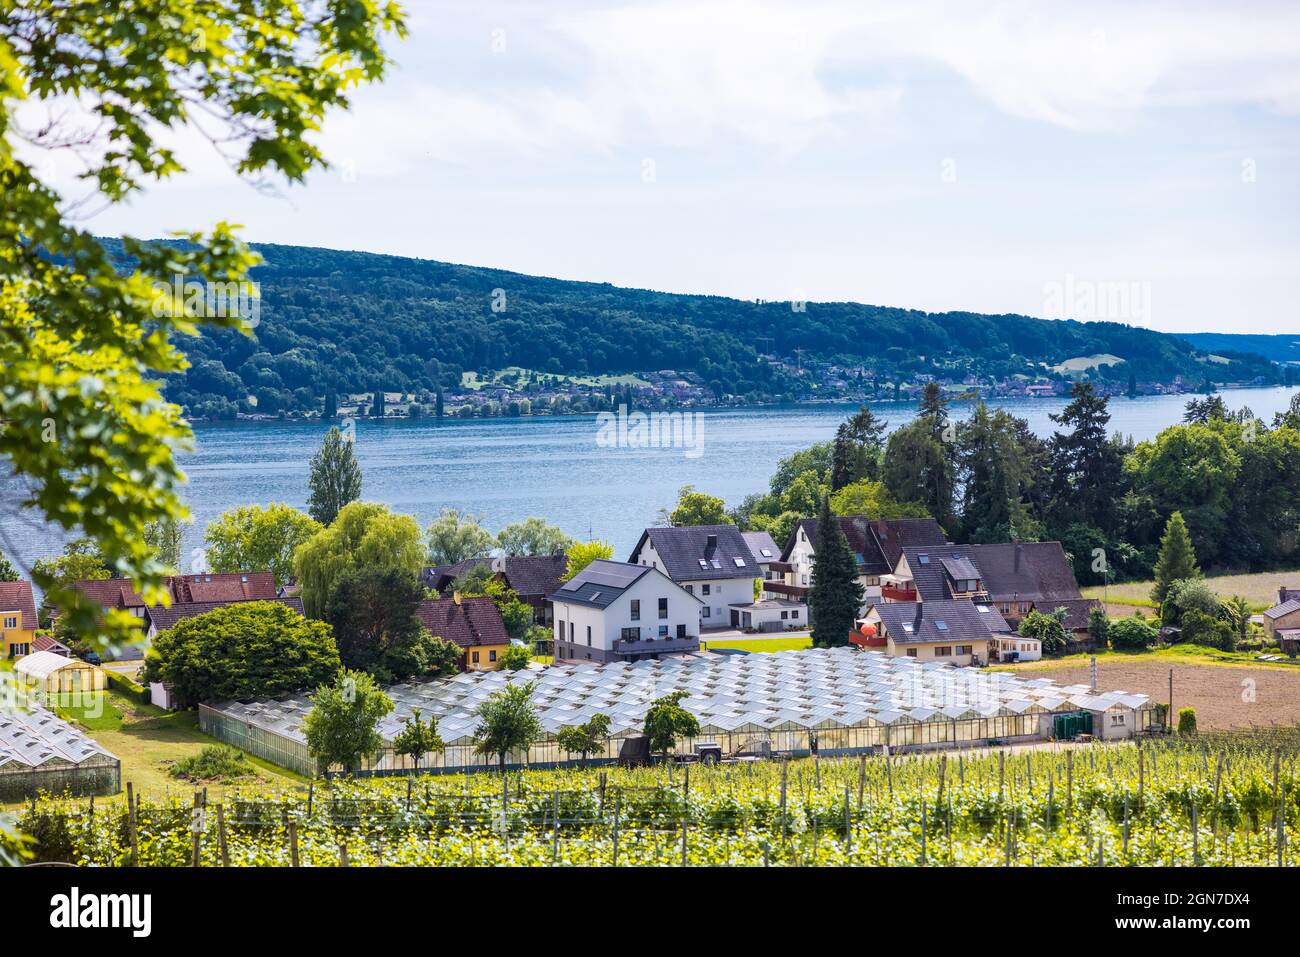 Wine-growing area on the island of Reichenau on Lake Constance, Germany Stock Photo